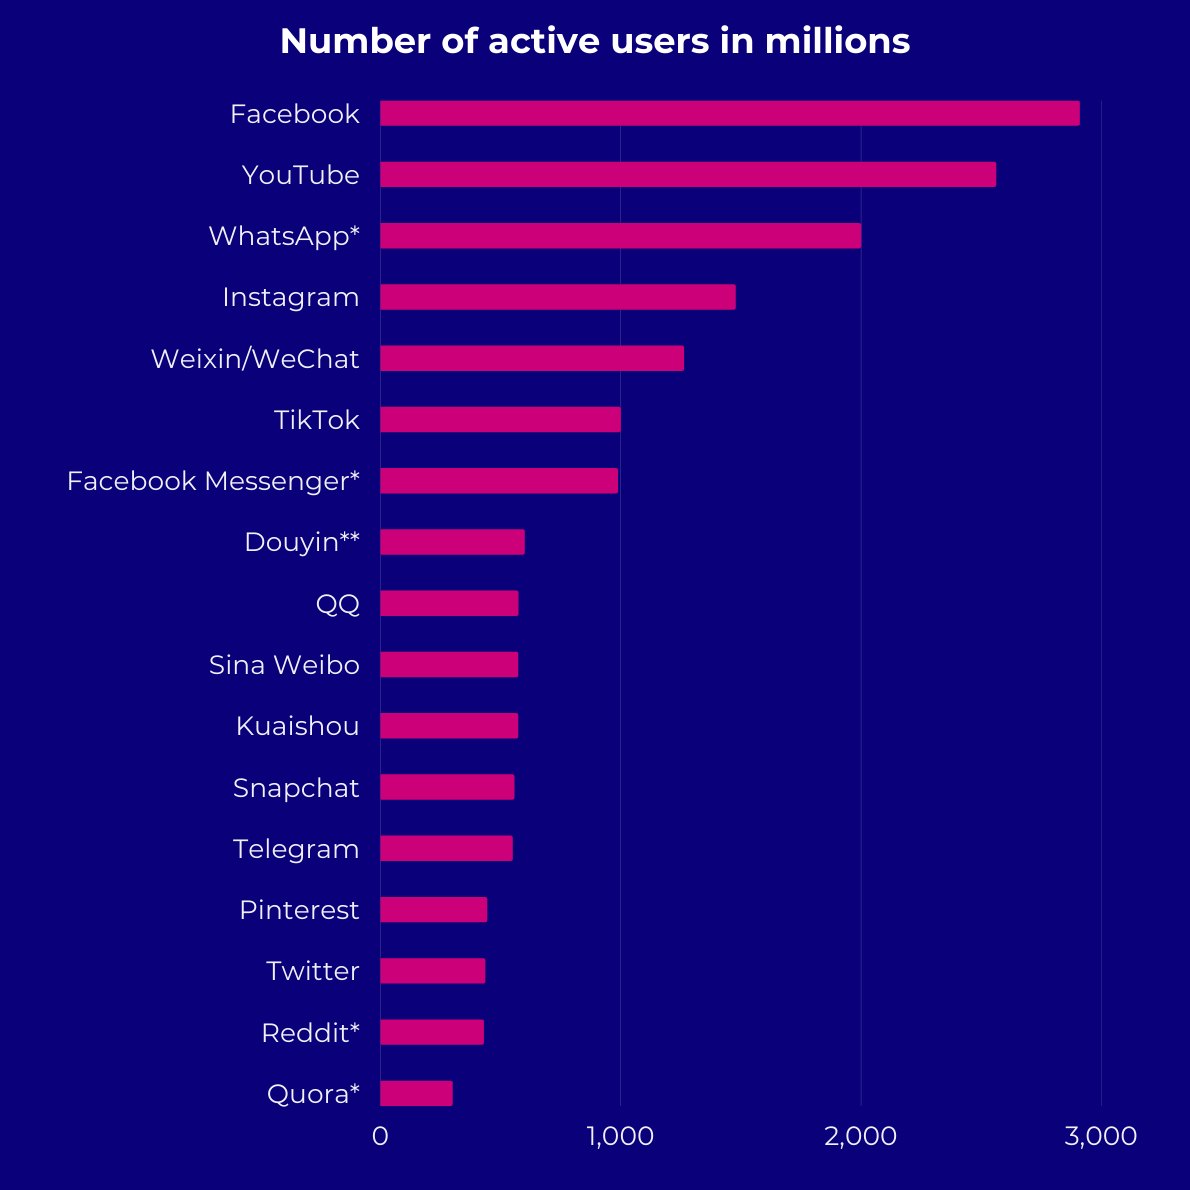 Number of active social media users in millions